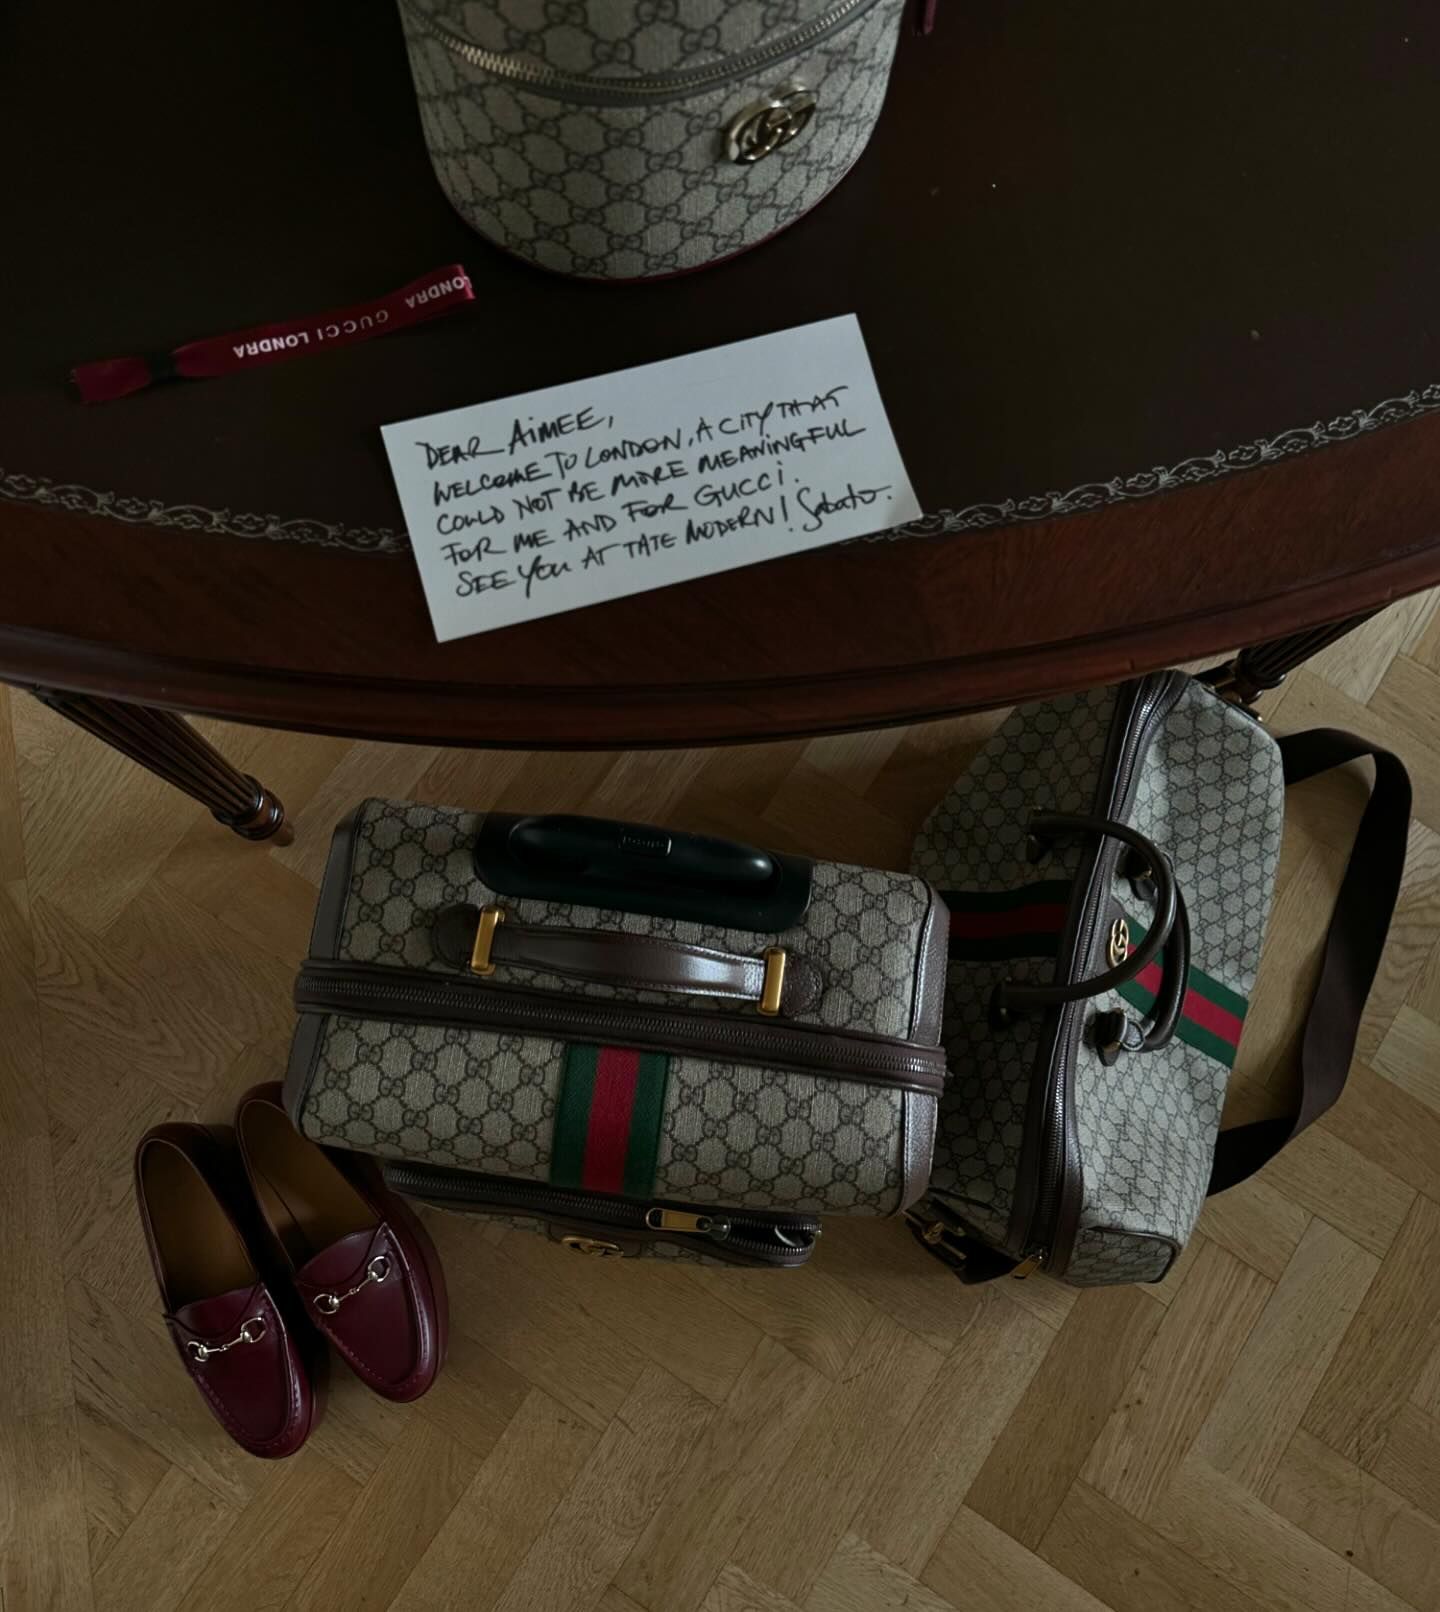 Gucci luggage and duffle aerial shot.